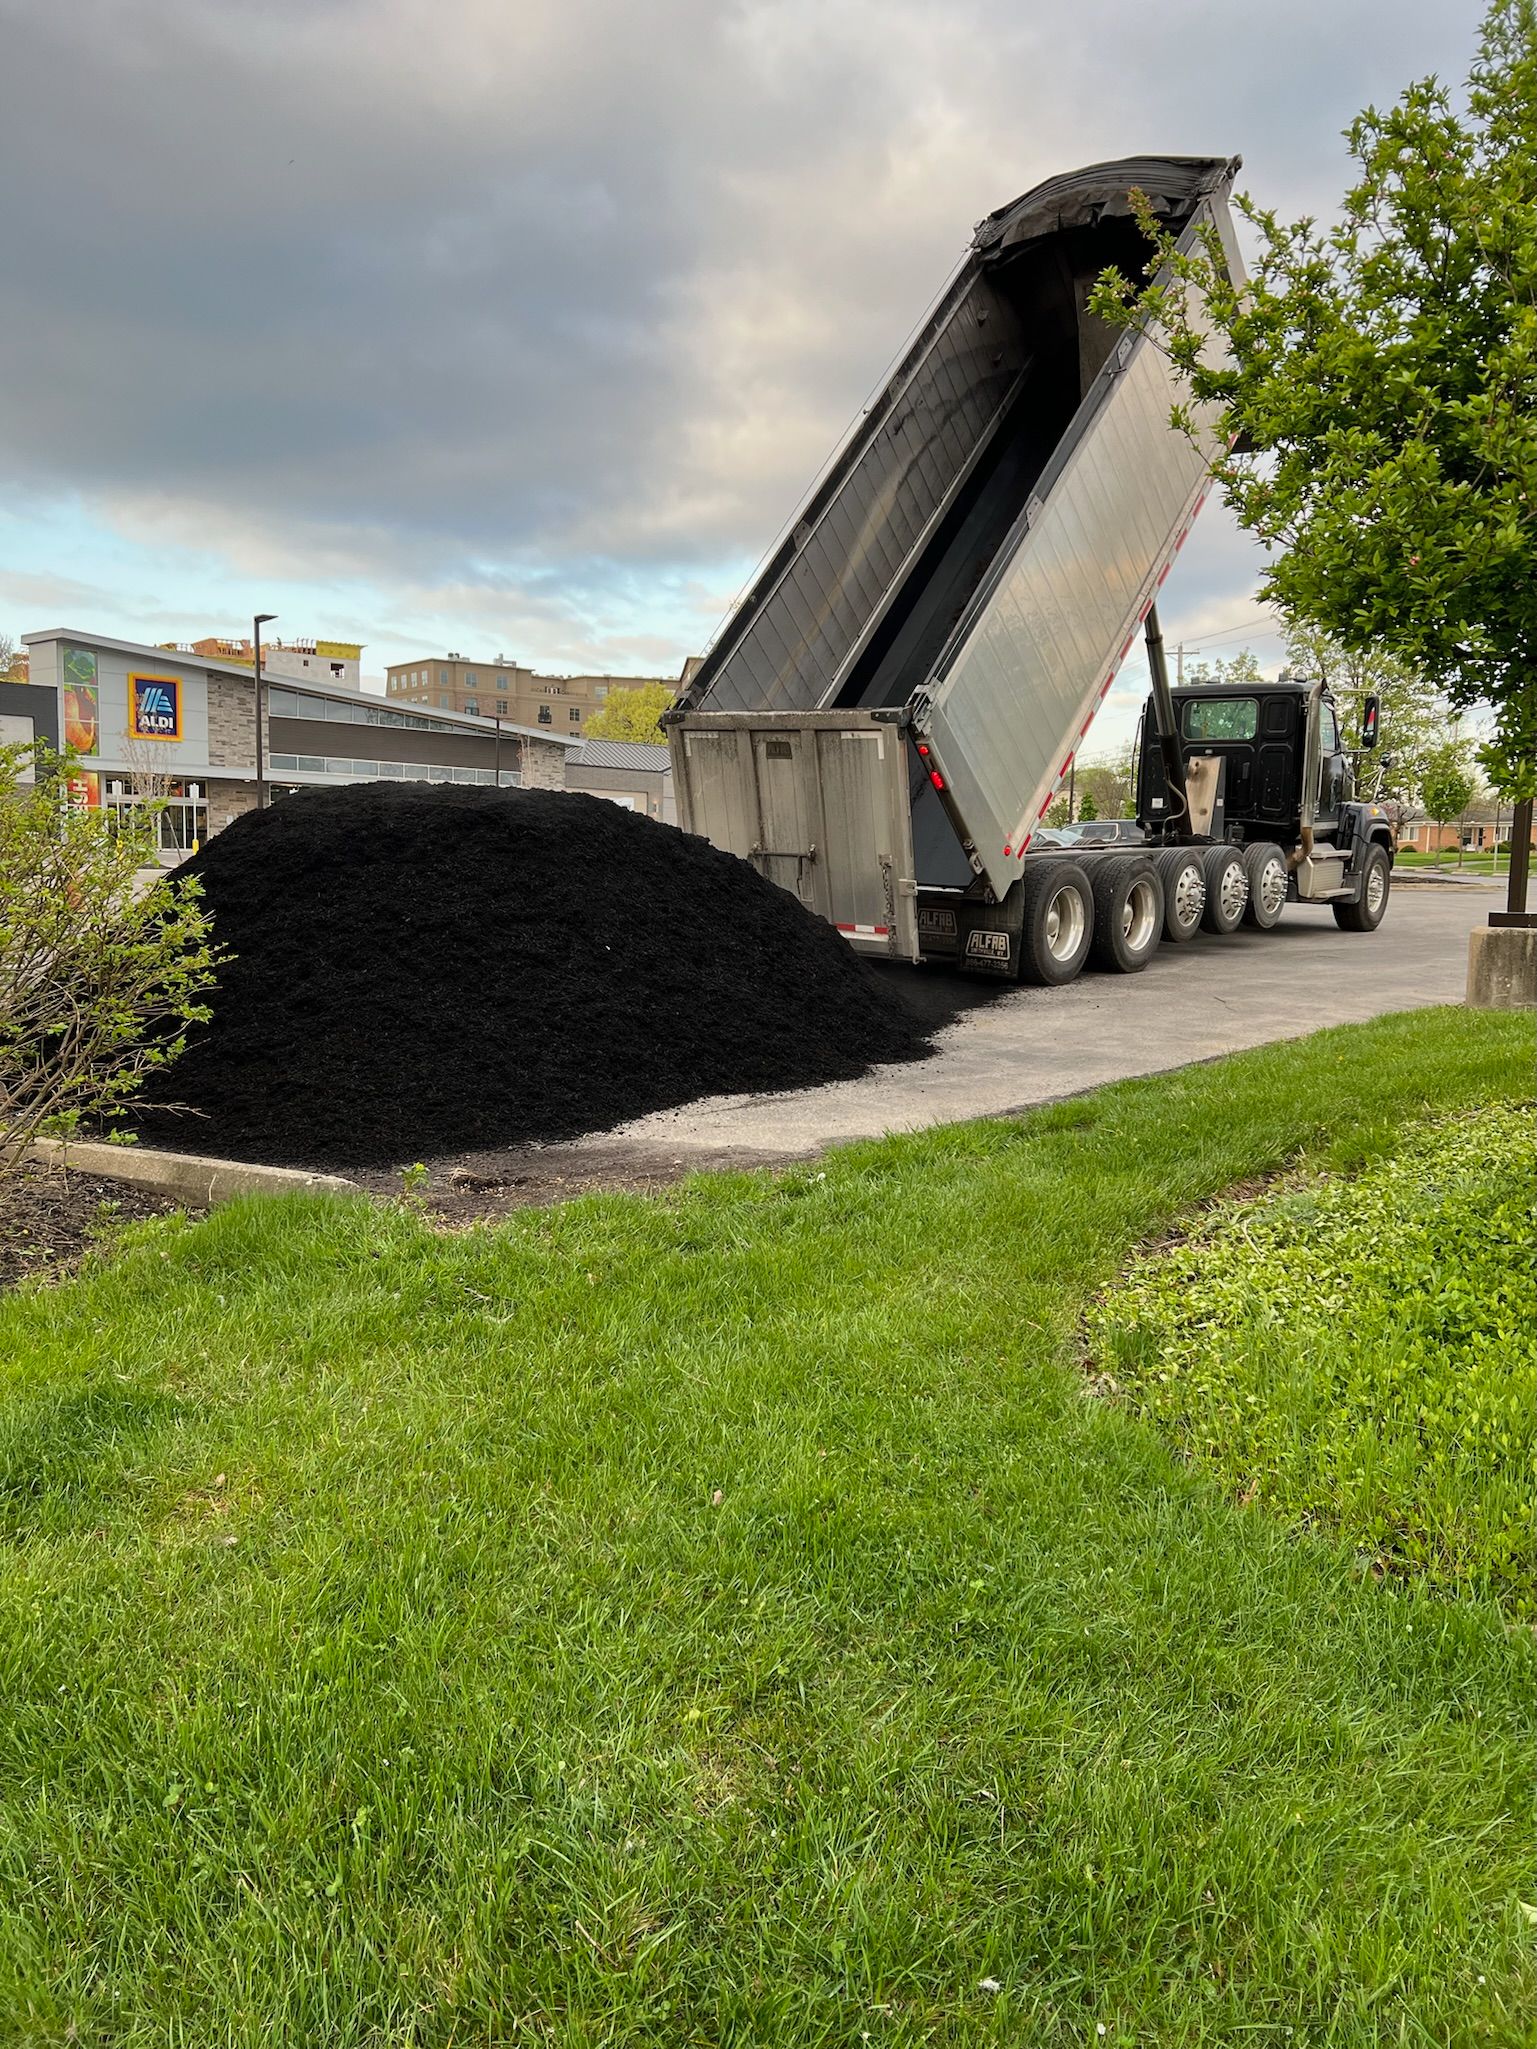 A dump truck is dumping a pile of black dirt on the side of the road.